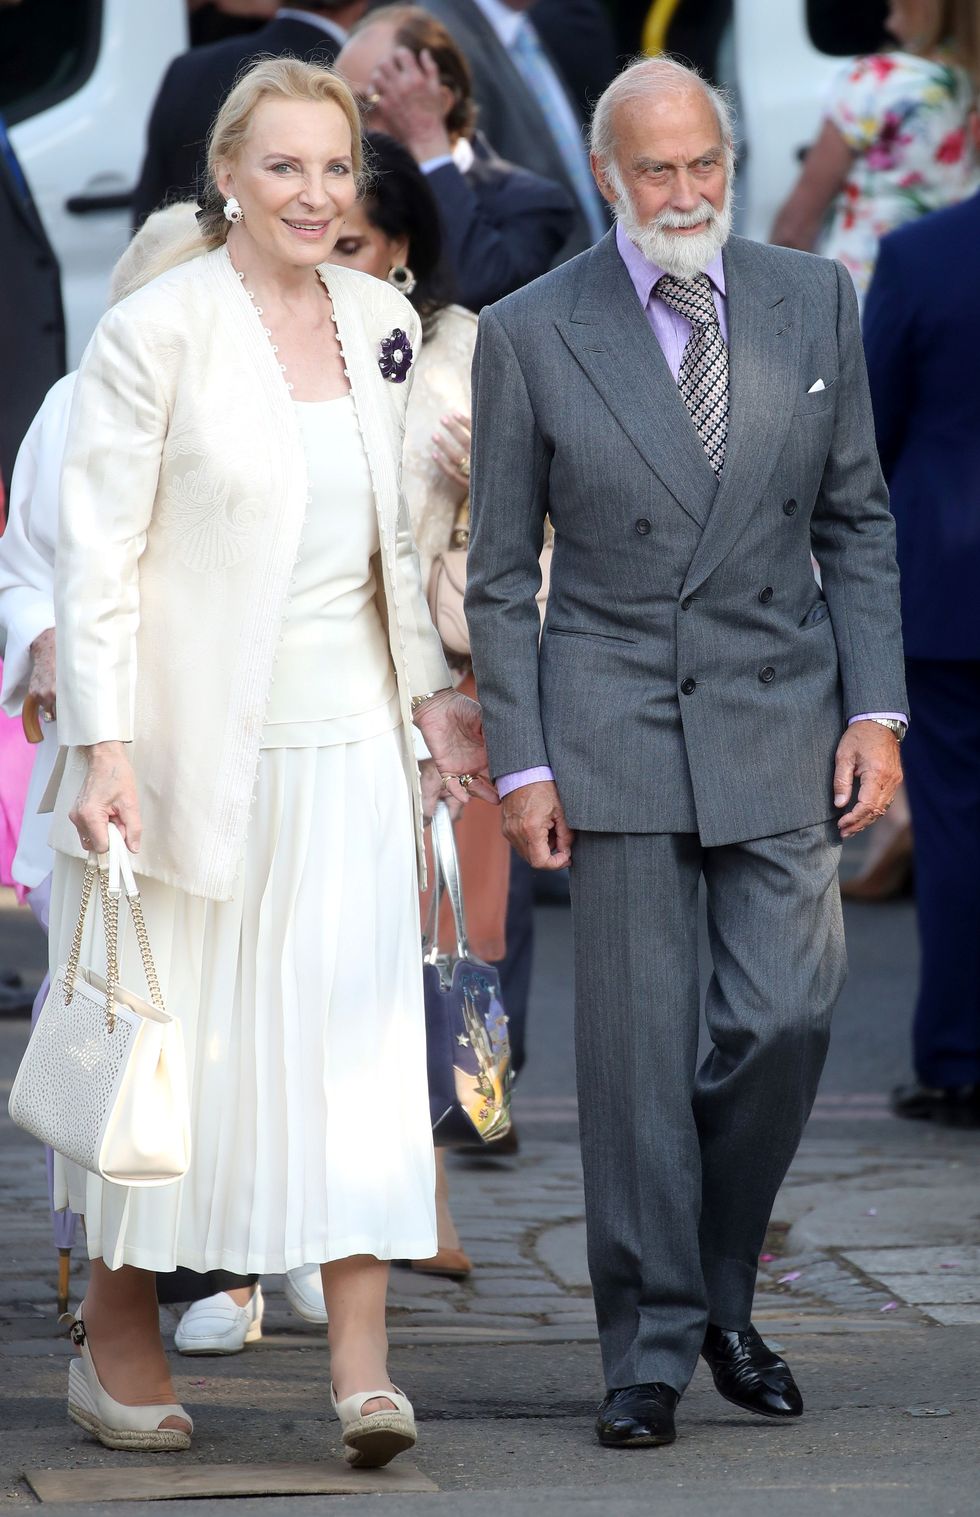 Photos of Royal Family at the Chelsea Flower Show - Princess Anne at ...